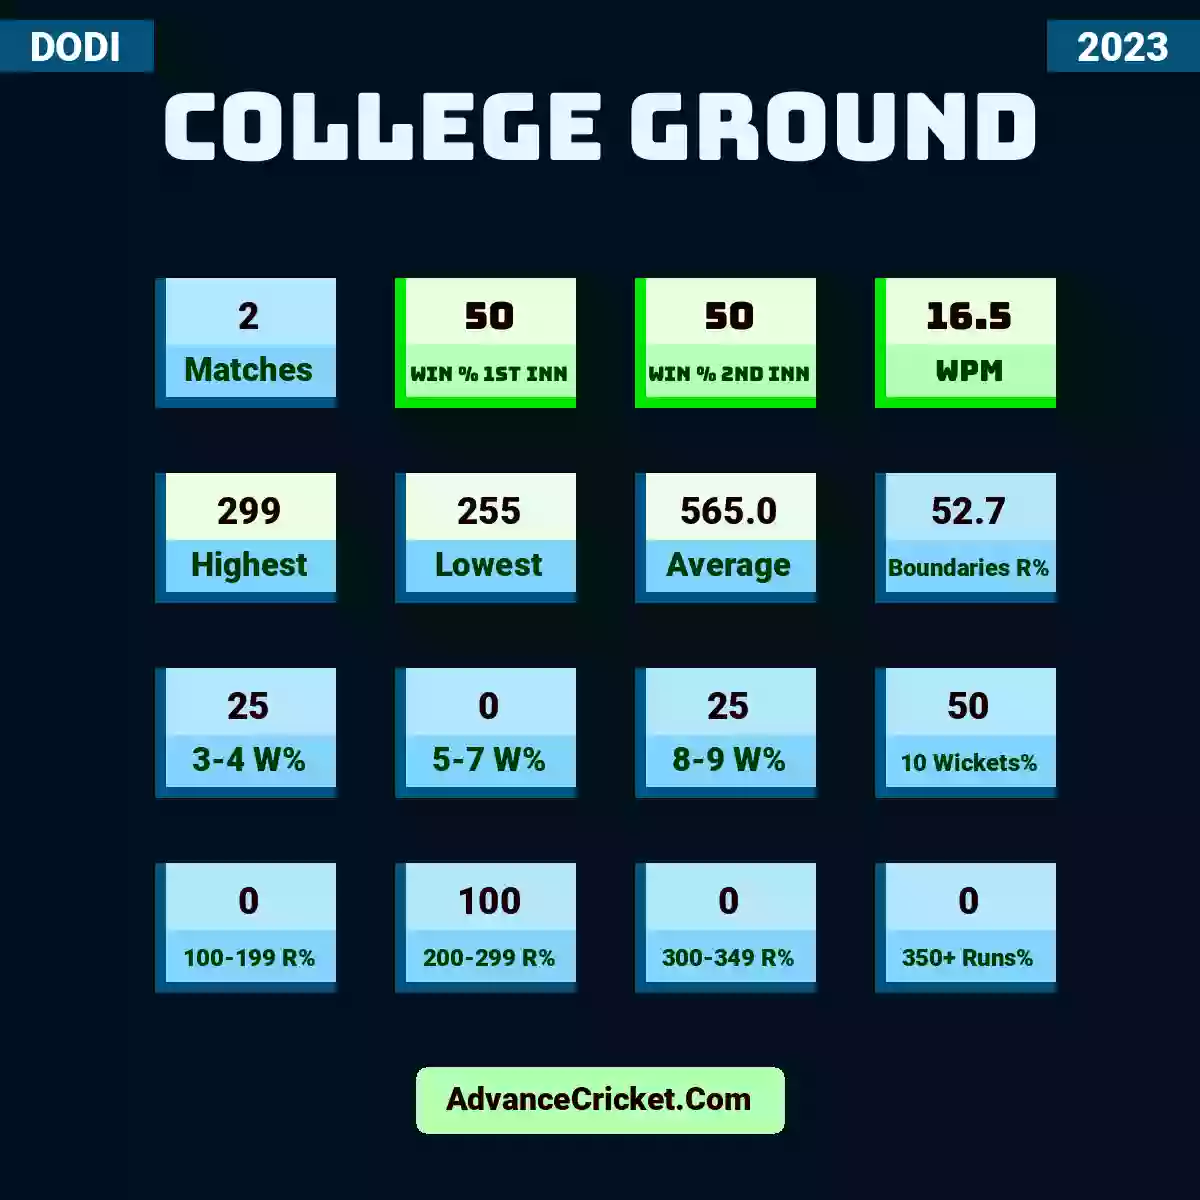 Image showing College Ground with Matches: 2, Win % 1st Inn: 50, Win % 2nd Inn: 50, WPM: 16.5, Highest: 299, Lowest: 255, Average: 565.0, Boundaries R%: 52.7, 3-4 W%: 25, 5-7 W%: 0, 8-9 W%: 25, 10 Wickets%: 50, 100-199 R%: 0, 200-299 R%: 100, 300-349 R%: 0, 350+ Runs%: 0.